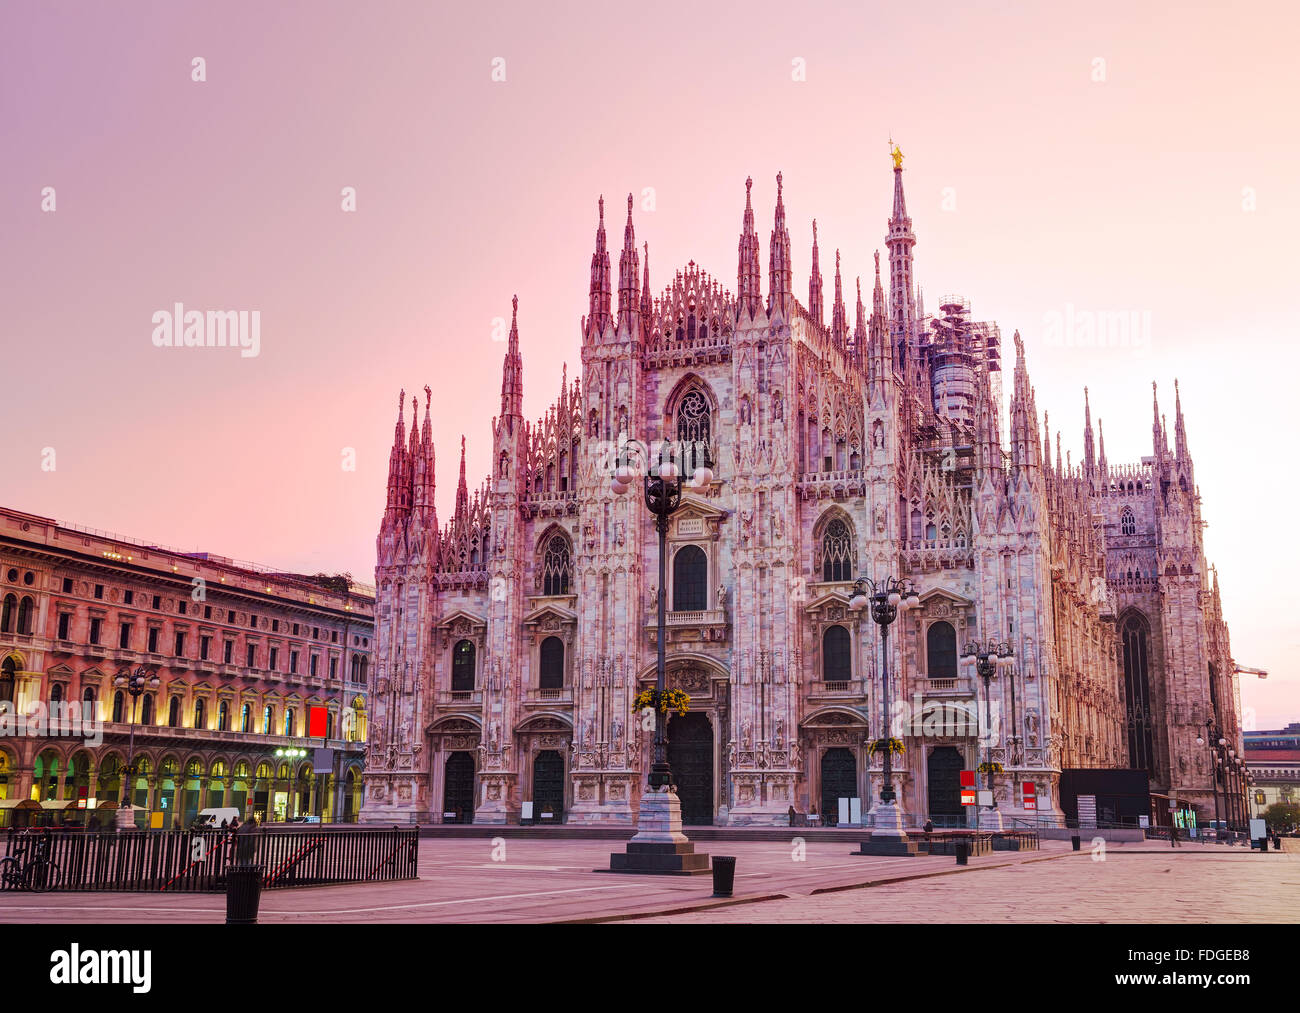 Duomo cathedral in Milan, Italy at sunrise Stock Photo